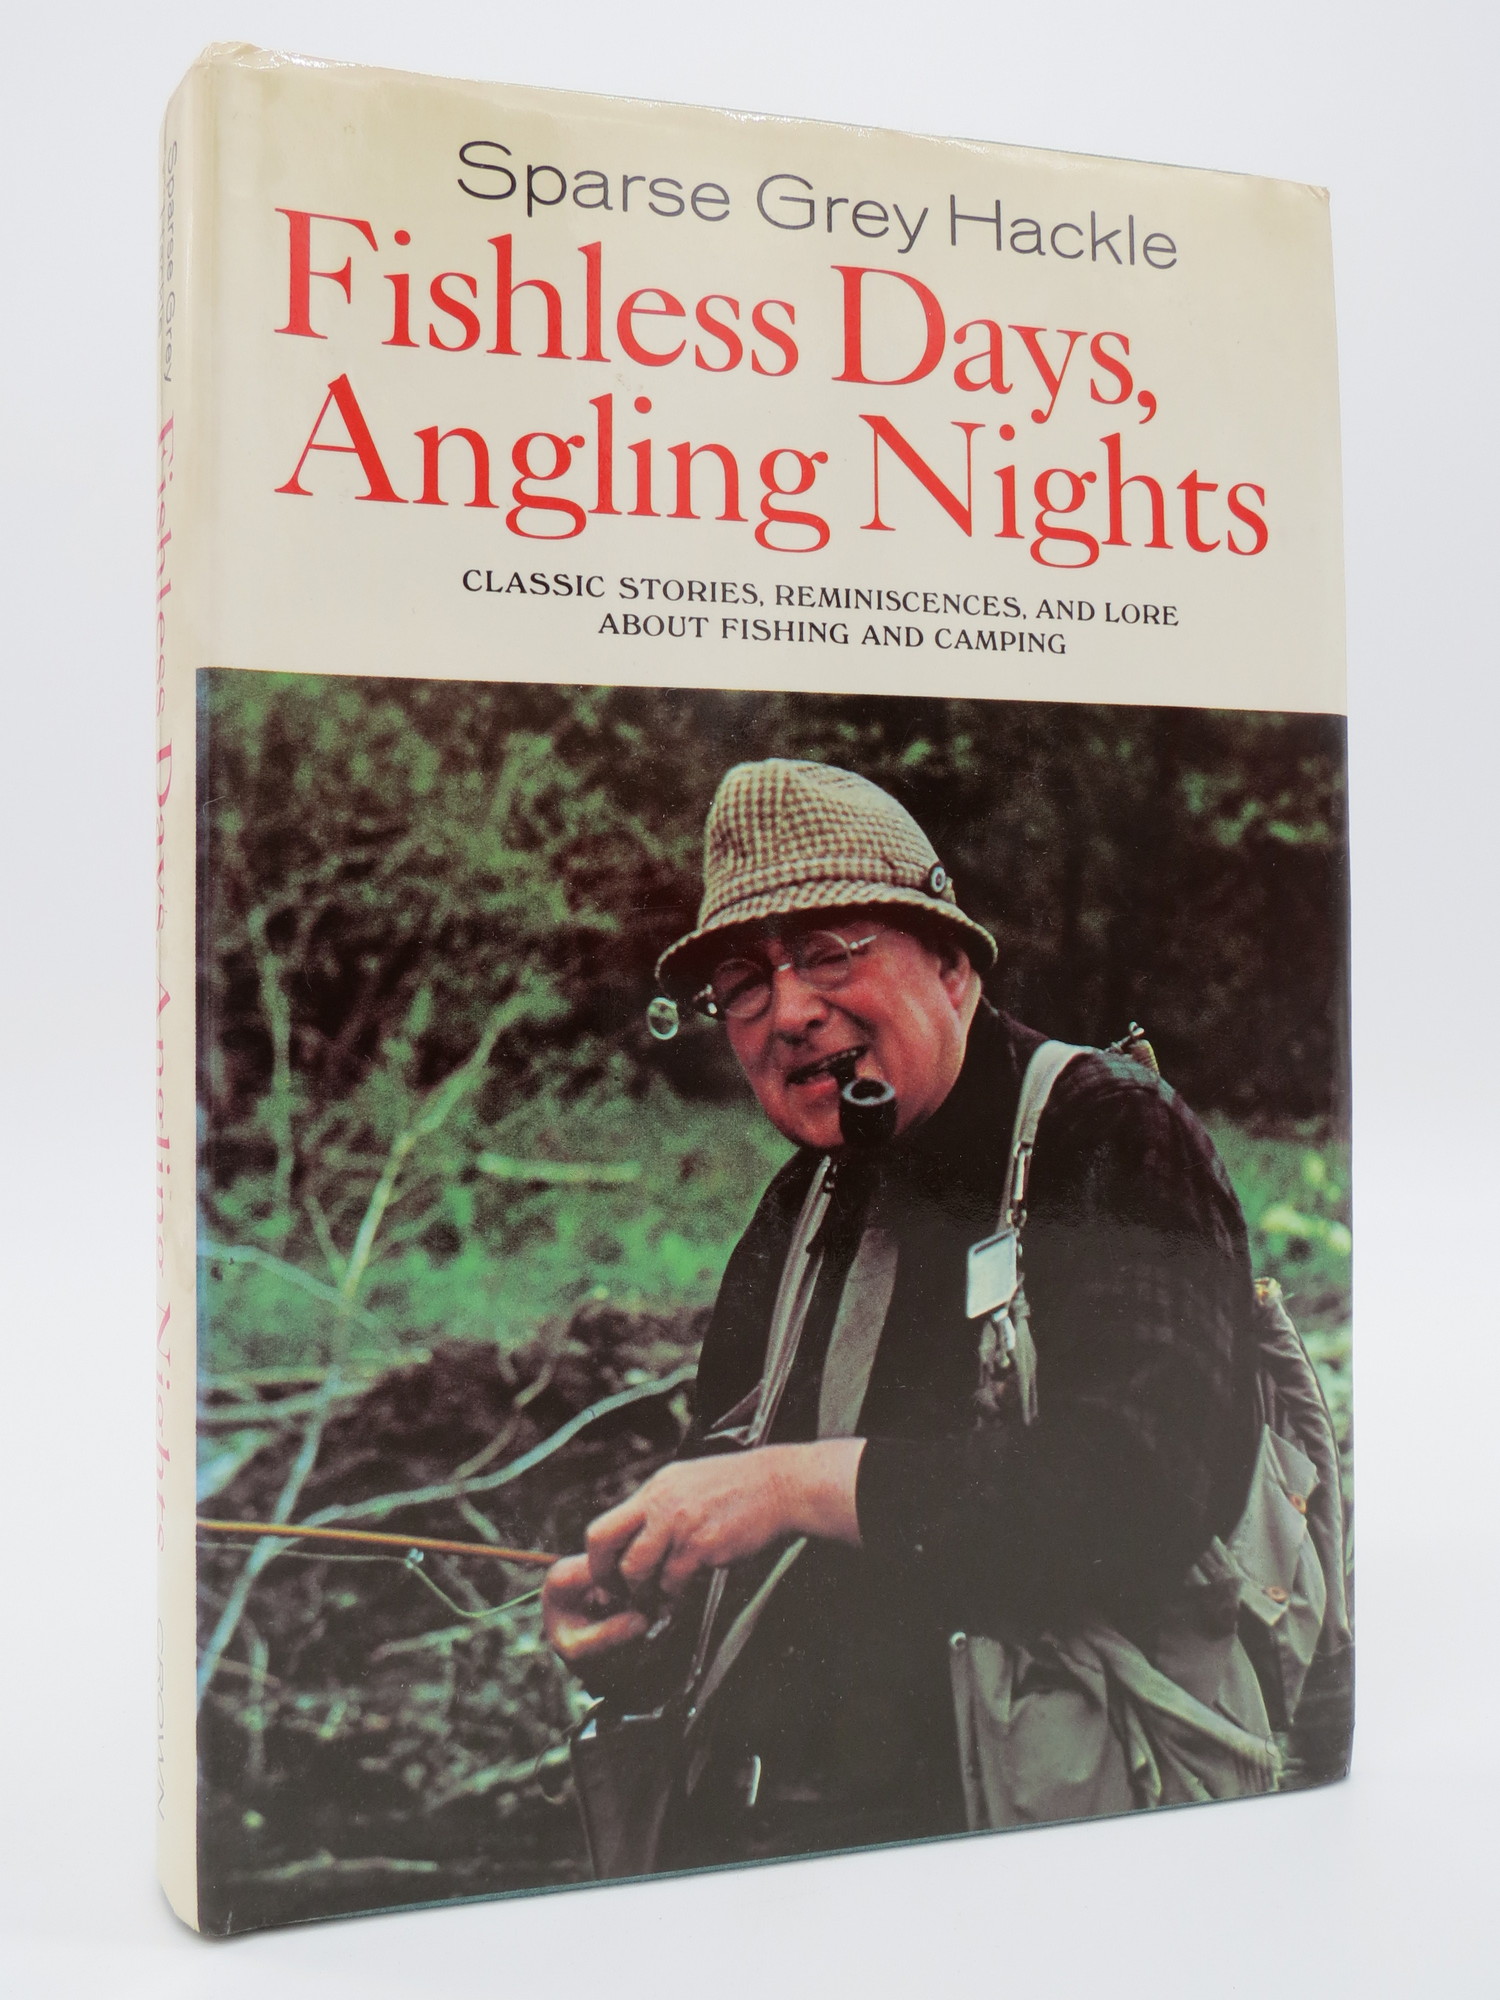 Image for FISHLESS DAYS, ANGLING NIGHTS. CLASSIC STORIES, REMINISCENCES, AND LORE ABOUT FISHING AND CAMPING